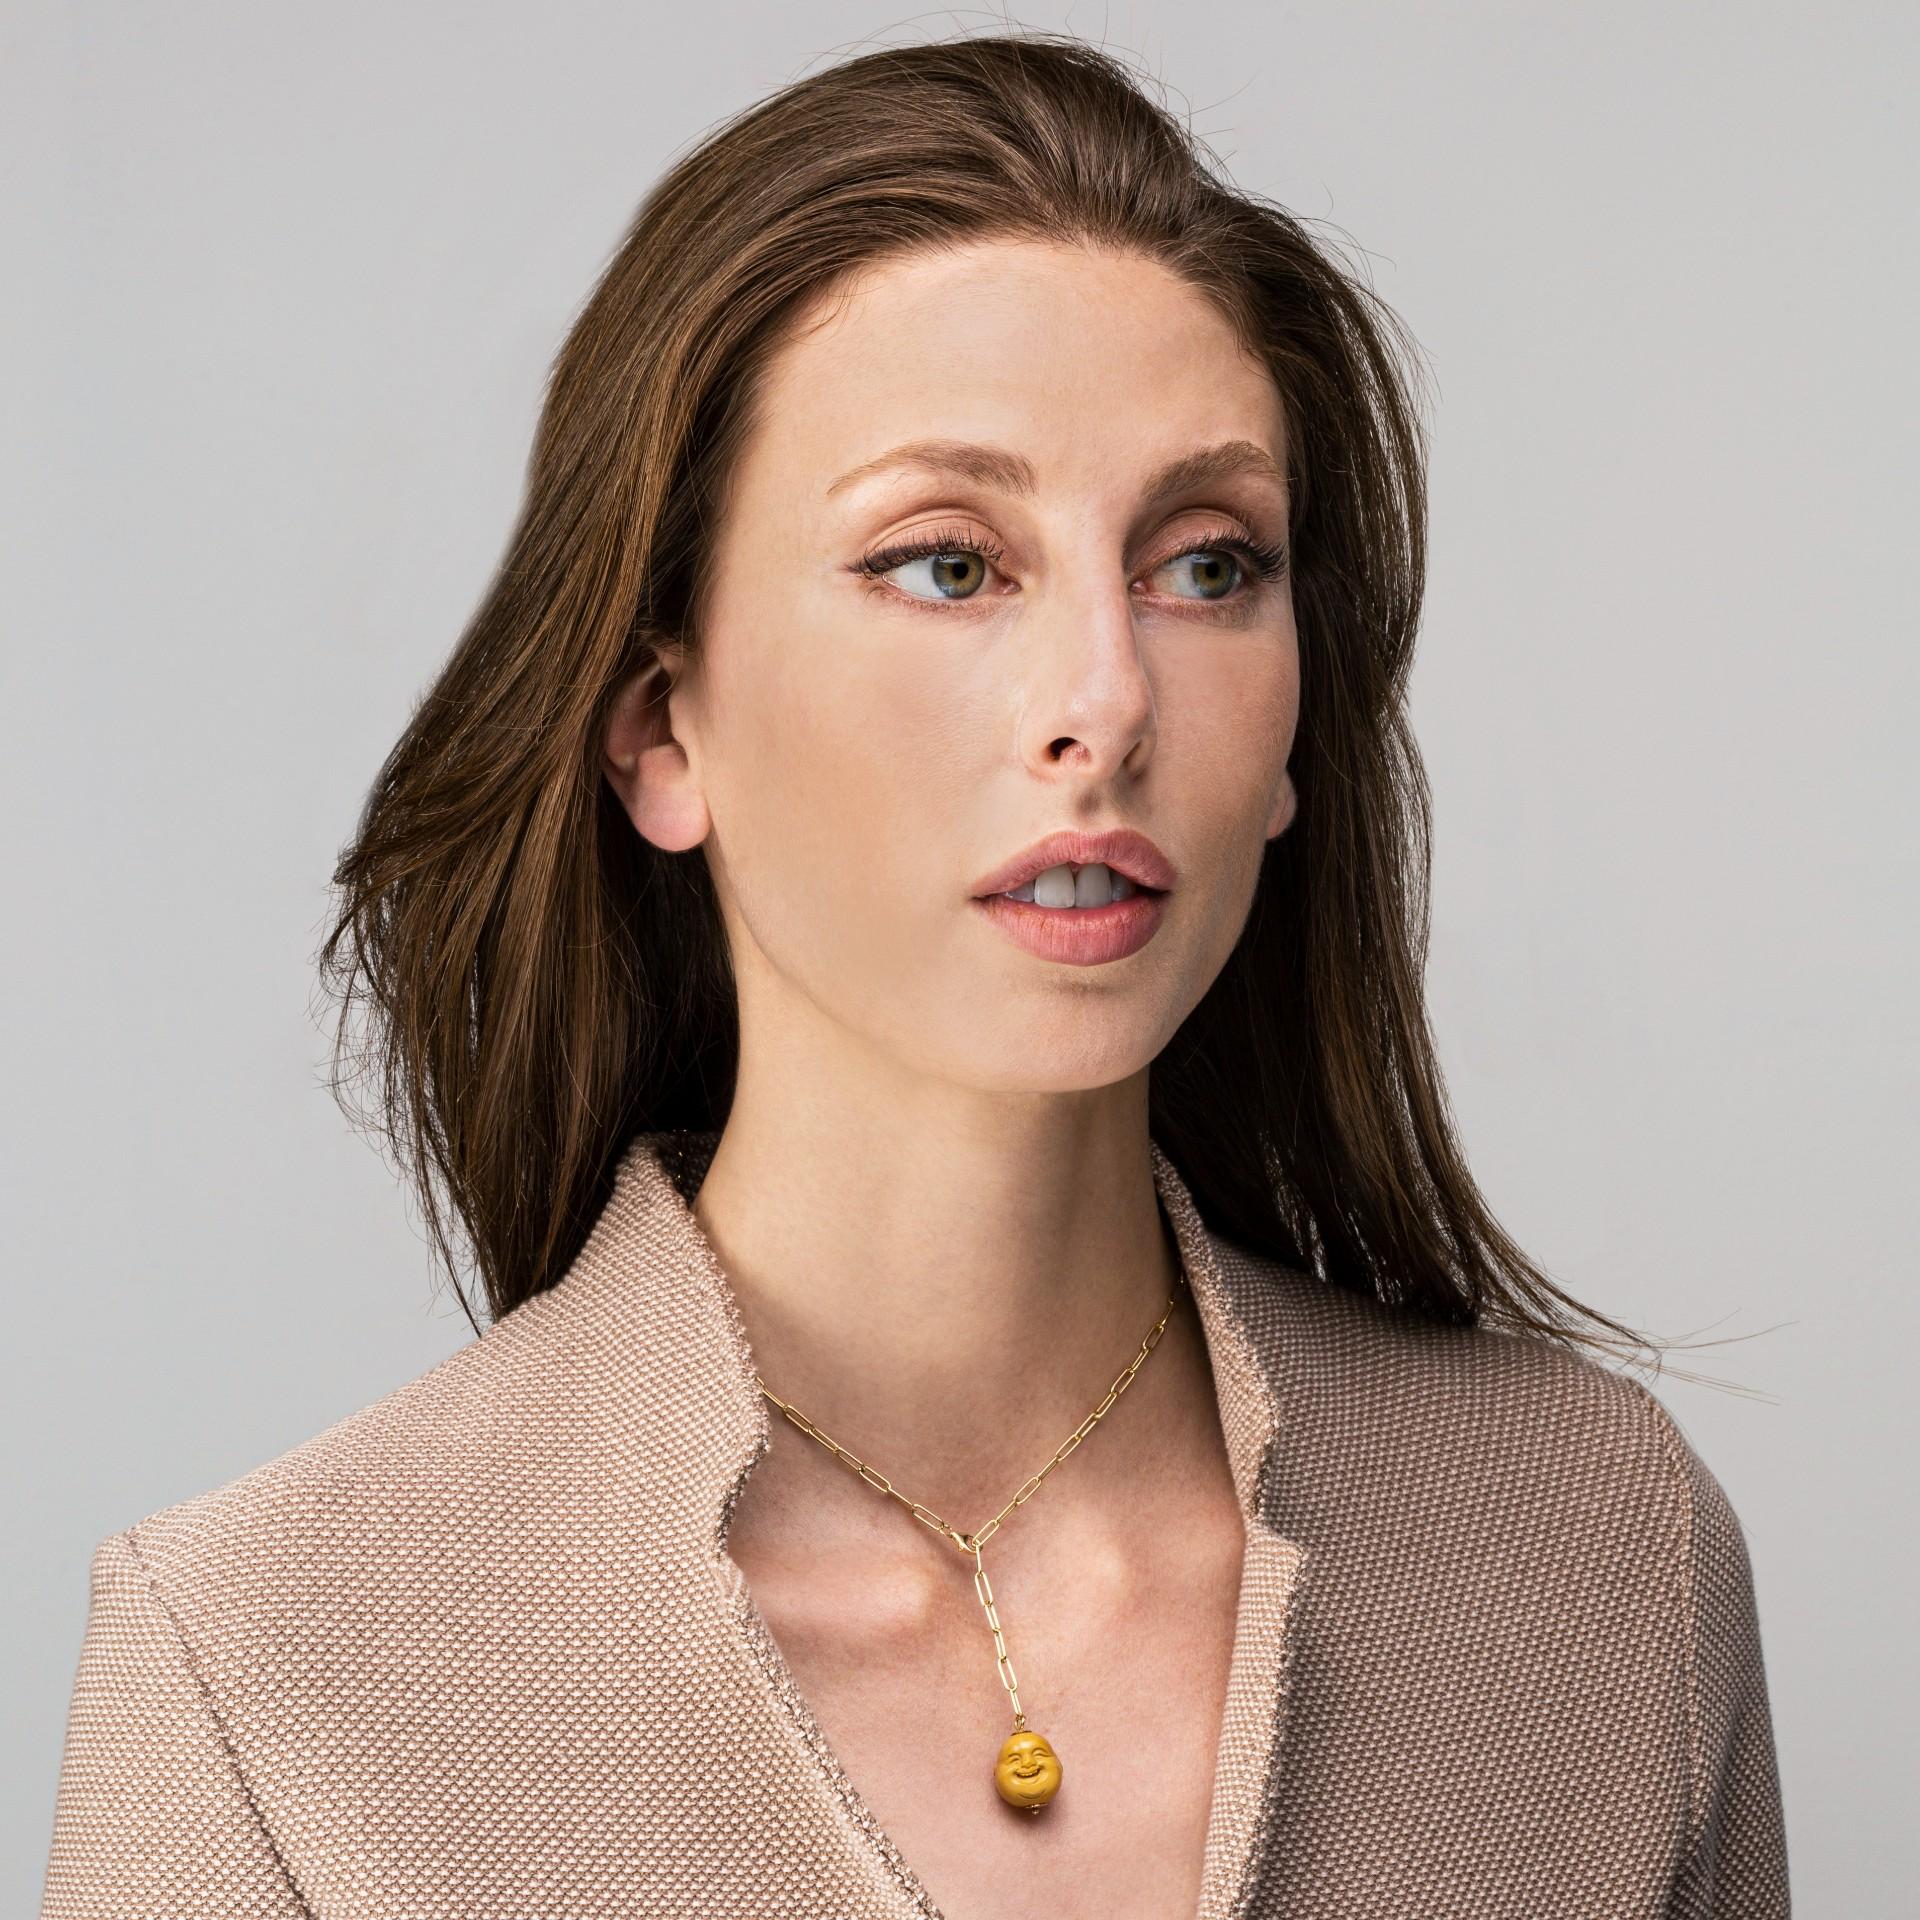 Alex Jona design collection, hand crafted in Italy, 18 karat yellow gold necklace suspending a jasper smile face charm.

Alex Jona gifts stand out, not only for their special design and for the excellent quality, but also for the careful attention